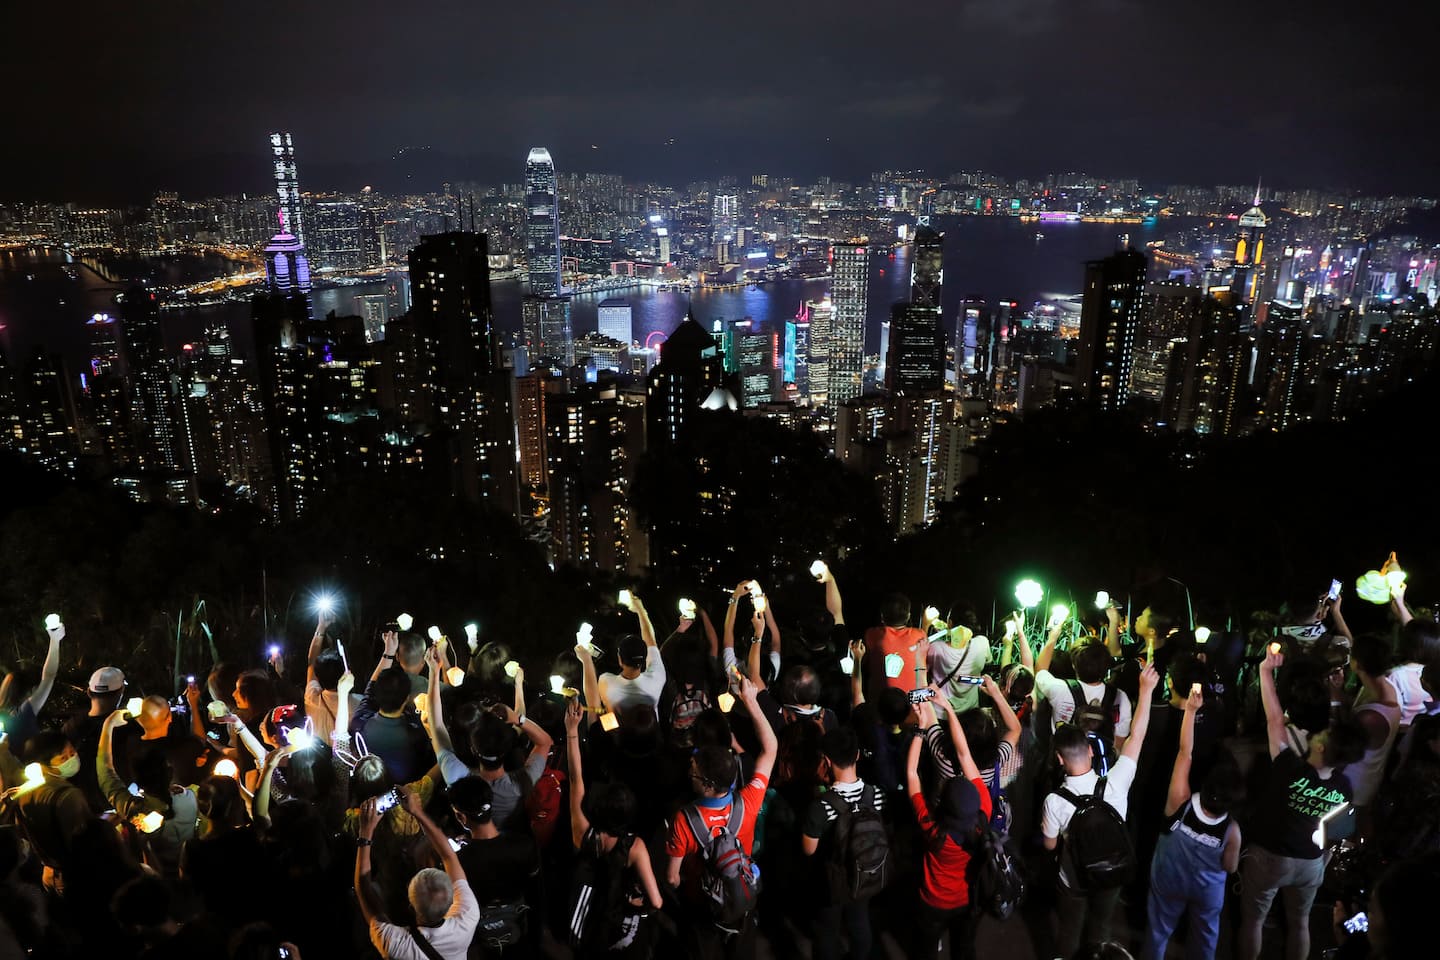 Internet restrictions and phone confiscations demonstrate the digital crackdown in Hong Kong